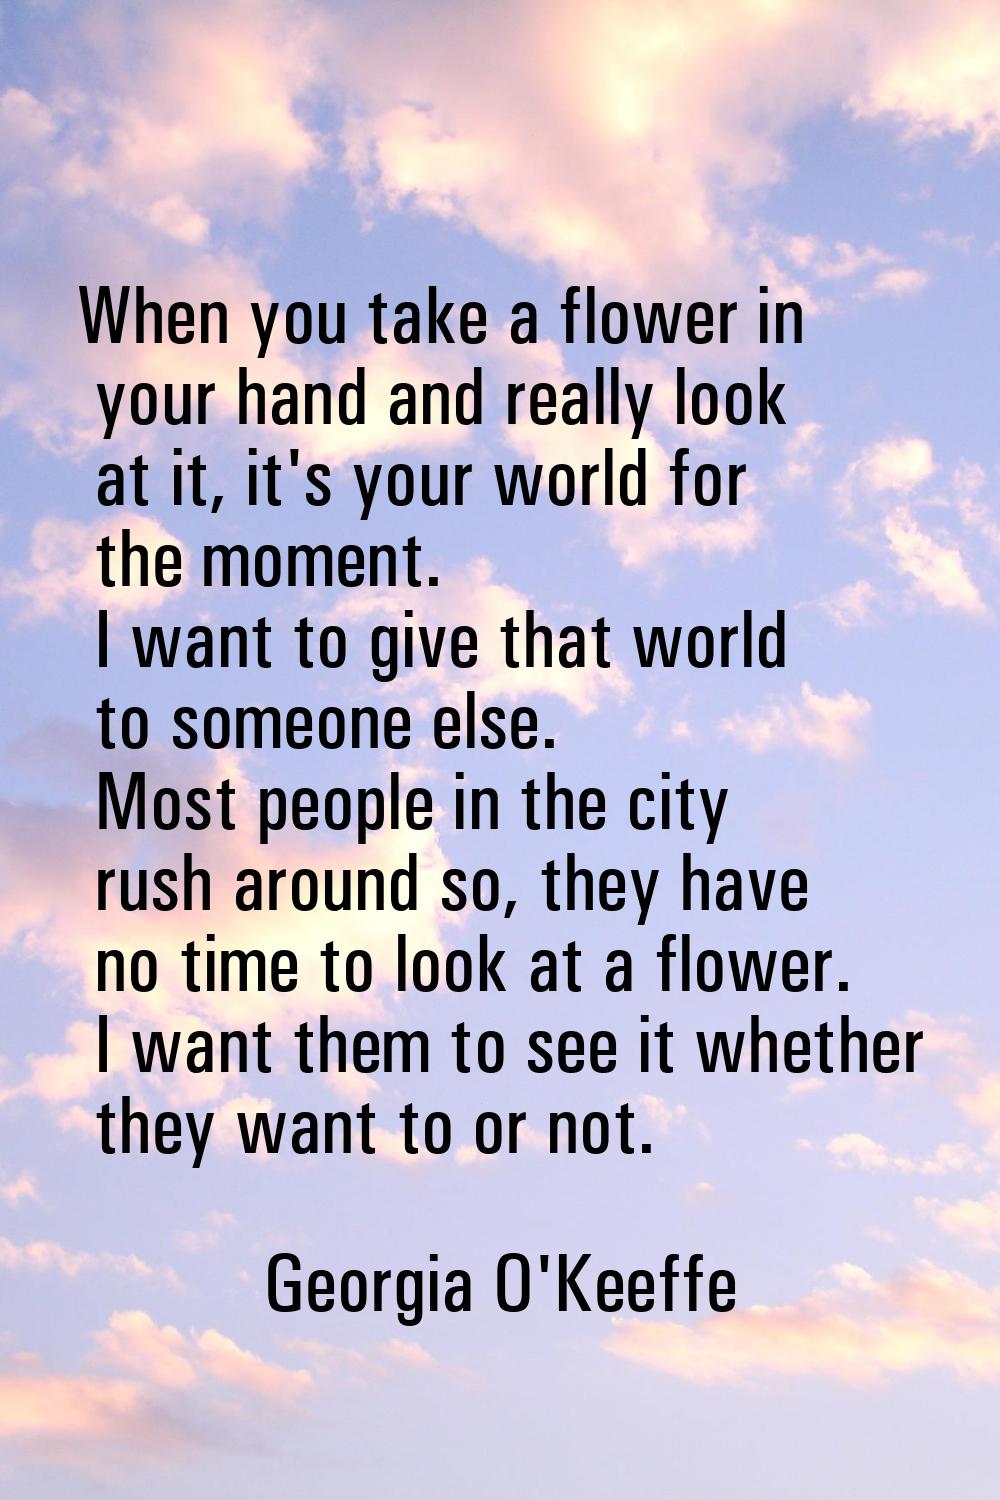 When you take a flower in your hand and really look at it, it's your world for the moment. I want t